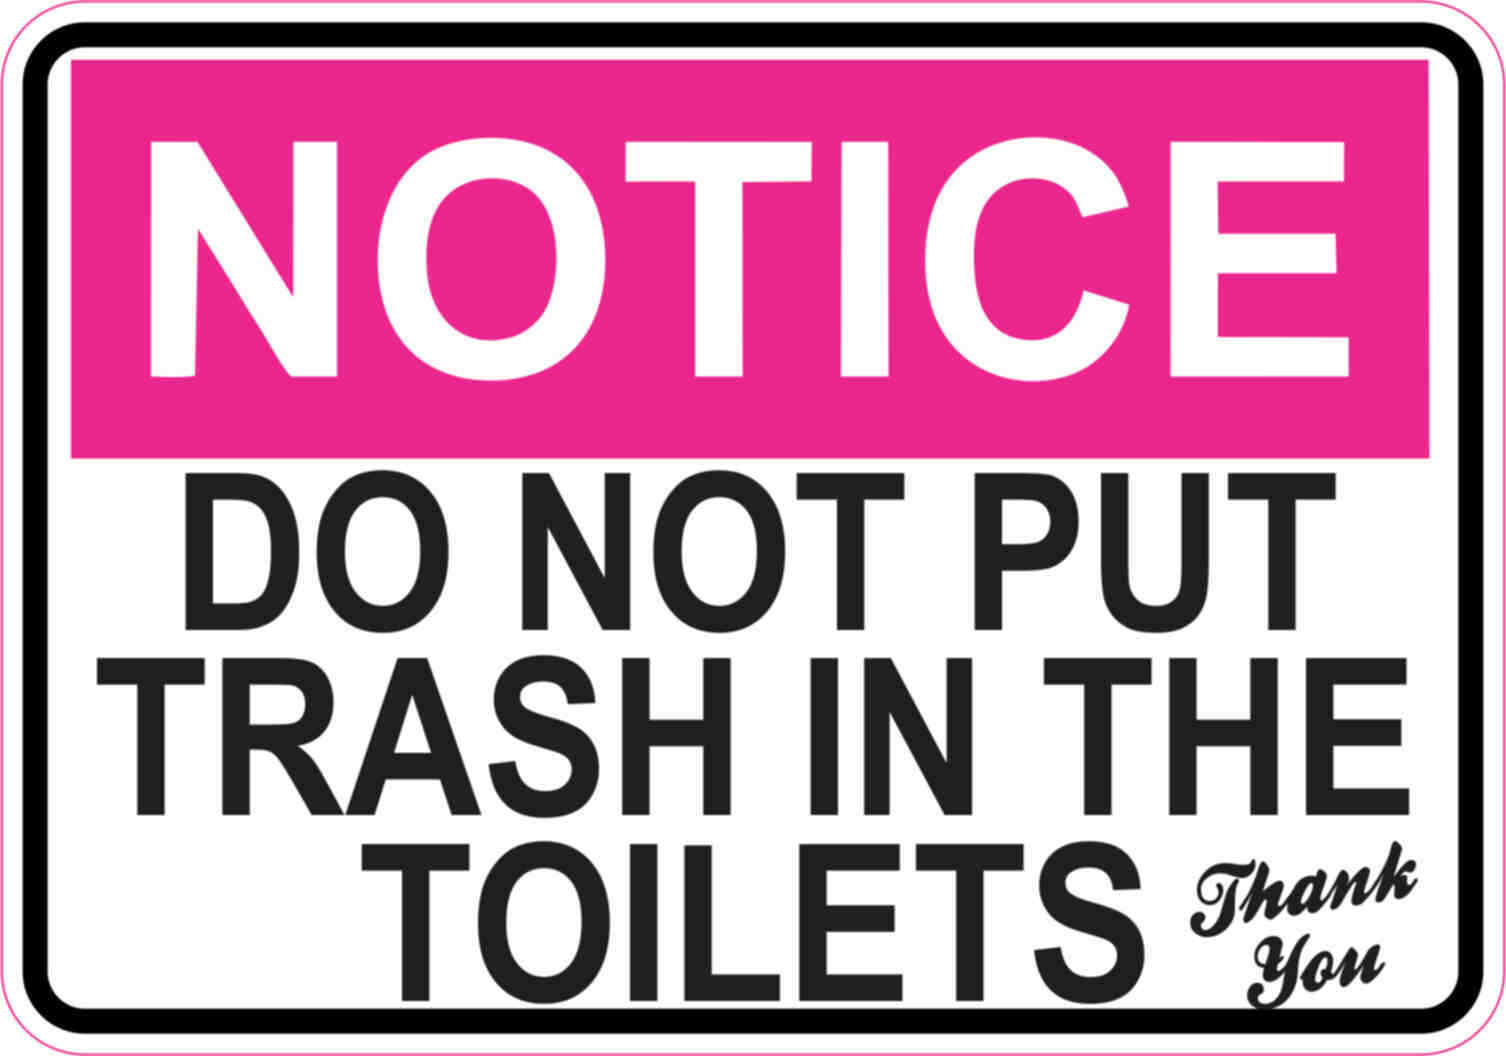 5 x 3.5 Pink Do Not Put Trash In The Toilets Magnet Magnetic Wall Magnets Sign